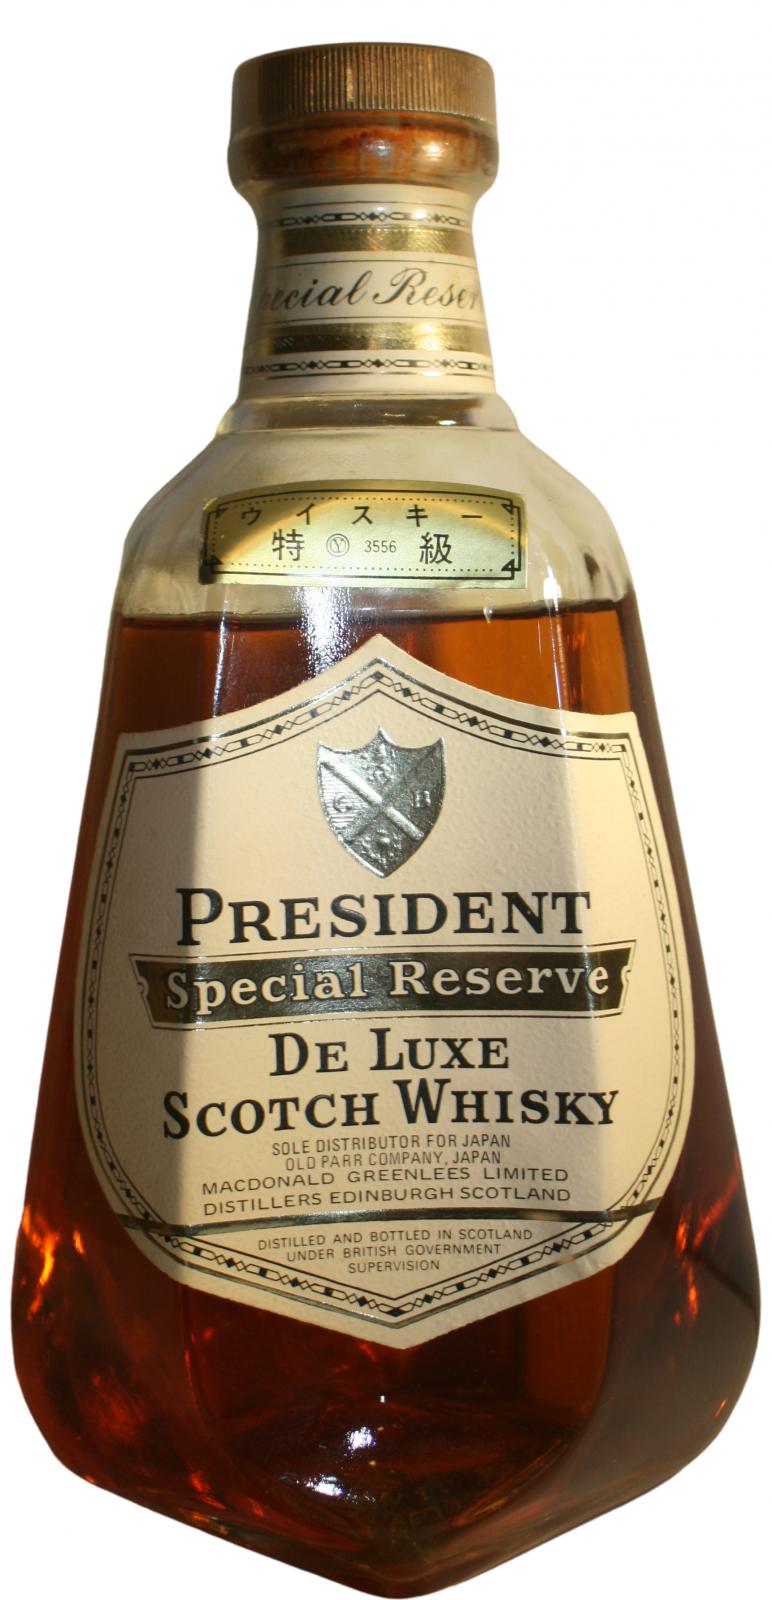 President Special Reserve - Value and price information - Whiskystats